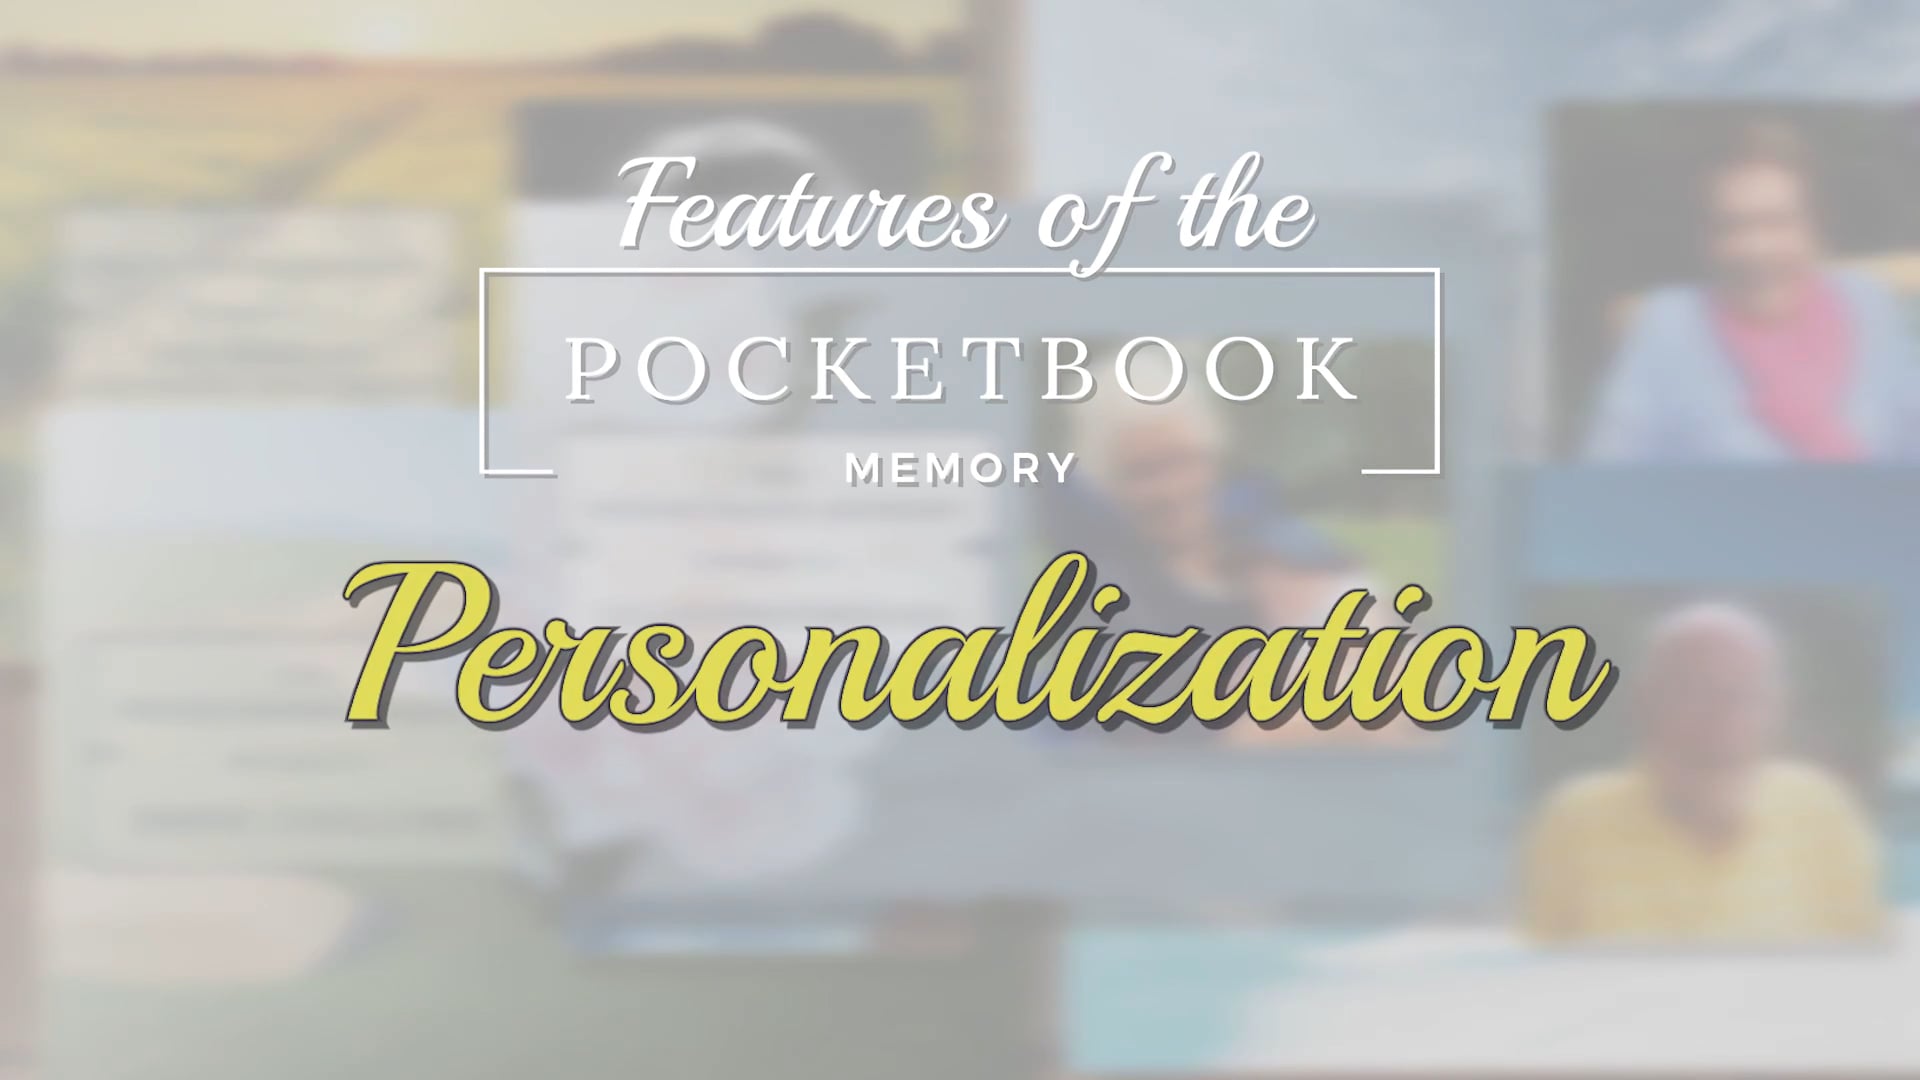 'Features' of the PocketBook Memory